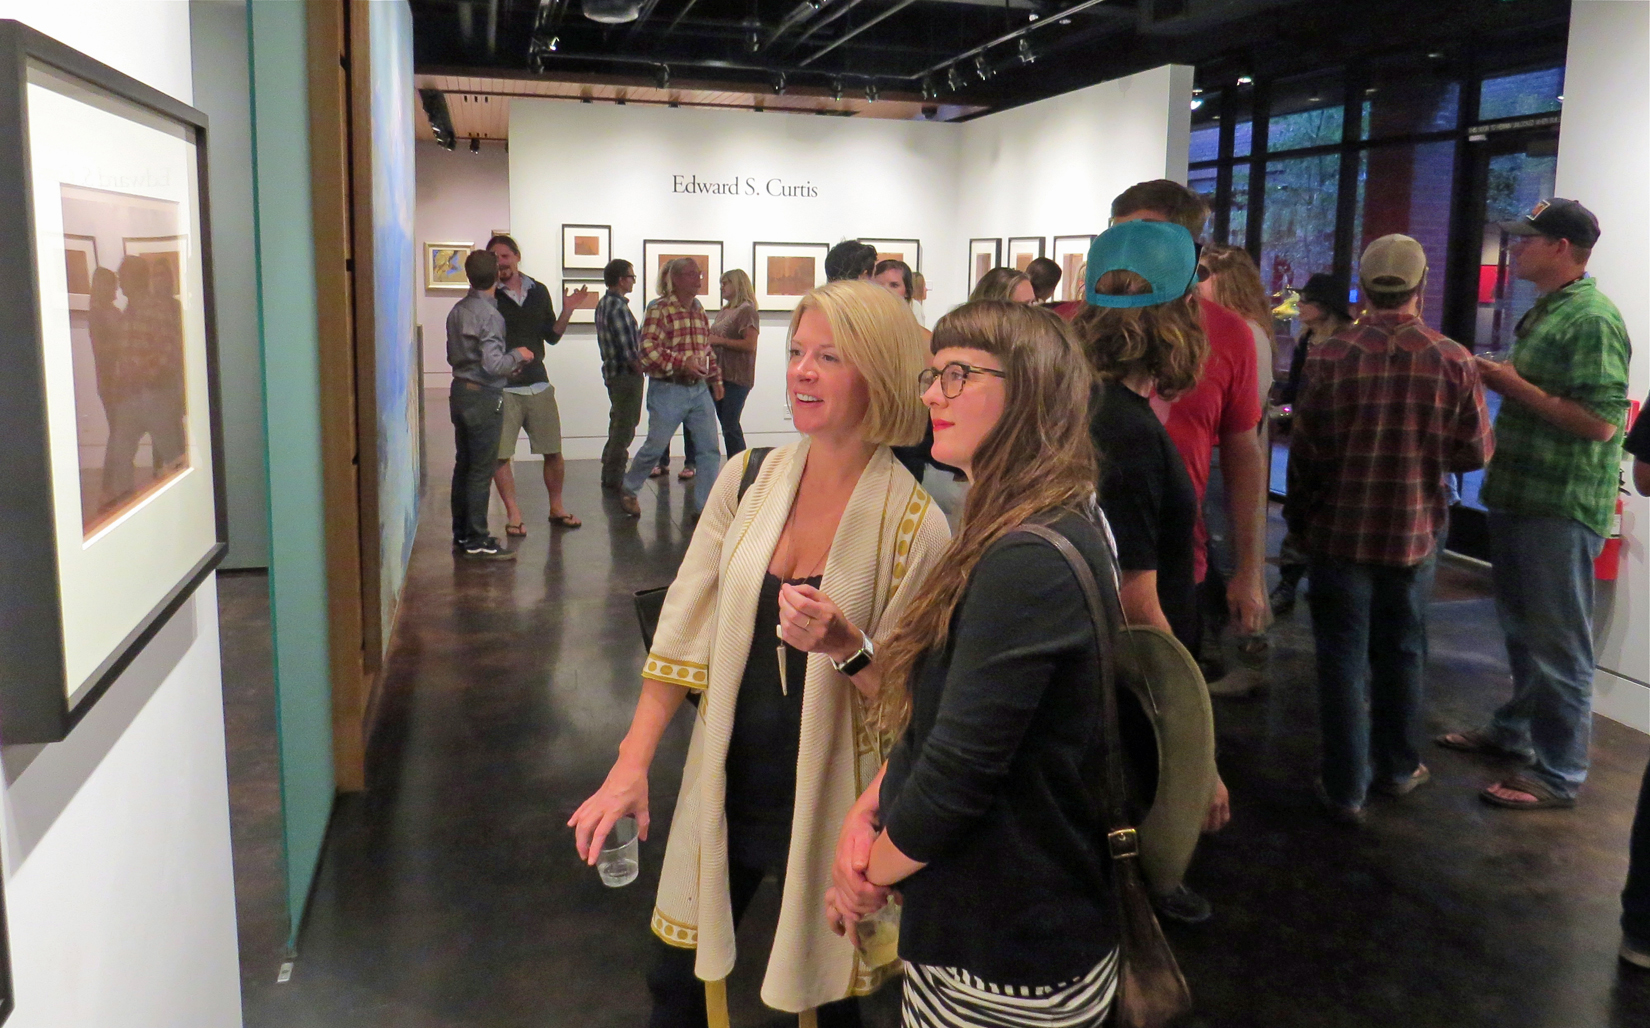 The Palates & Palettes Gallery Walk is another popular event of the Jackson Hole Fall Arts Festival where art enthusiasts browse more than 50 local art galleries.